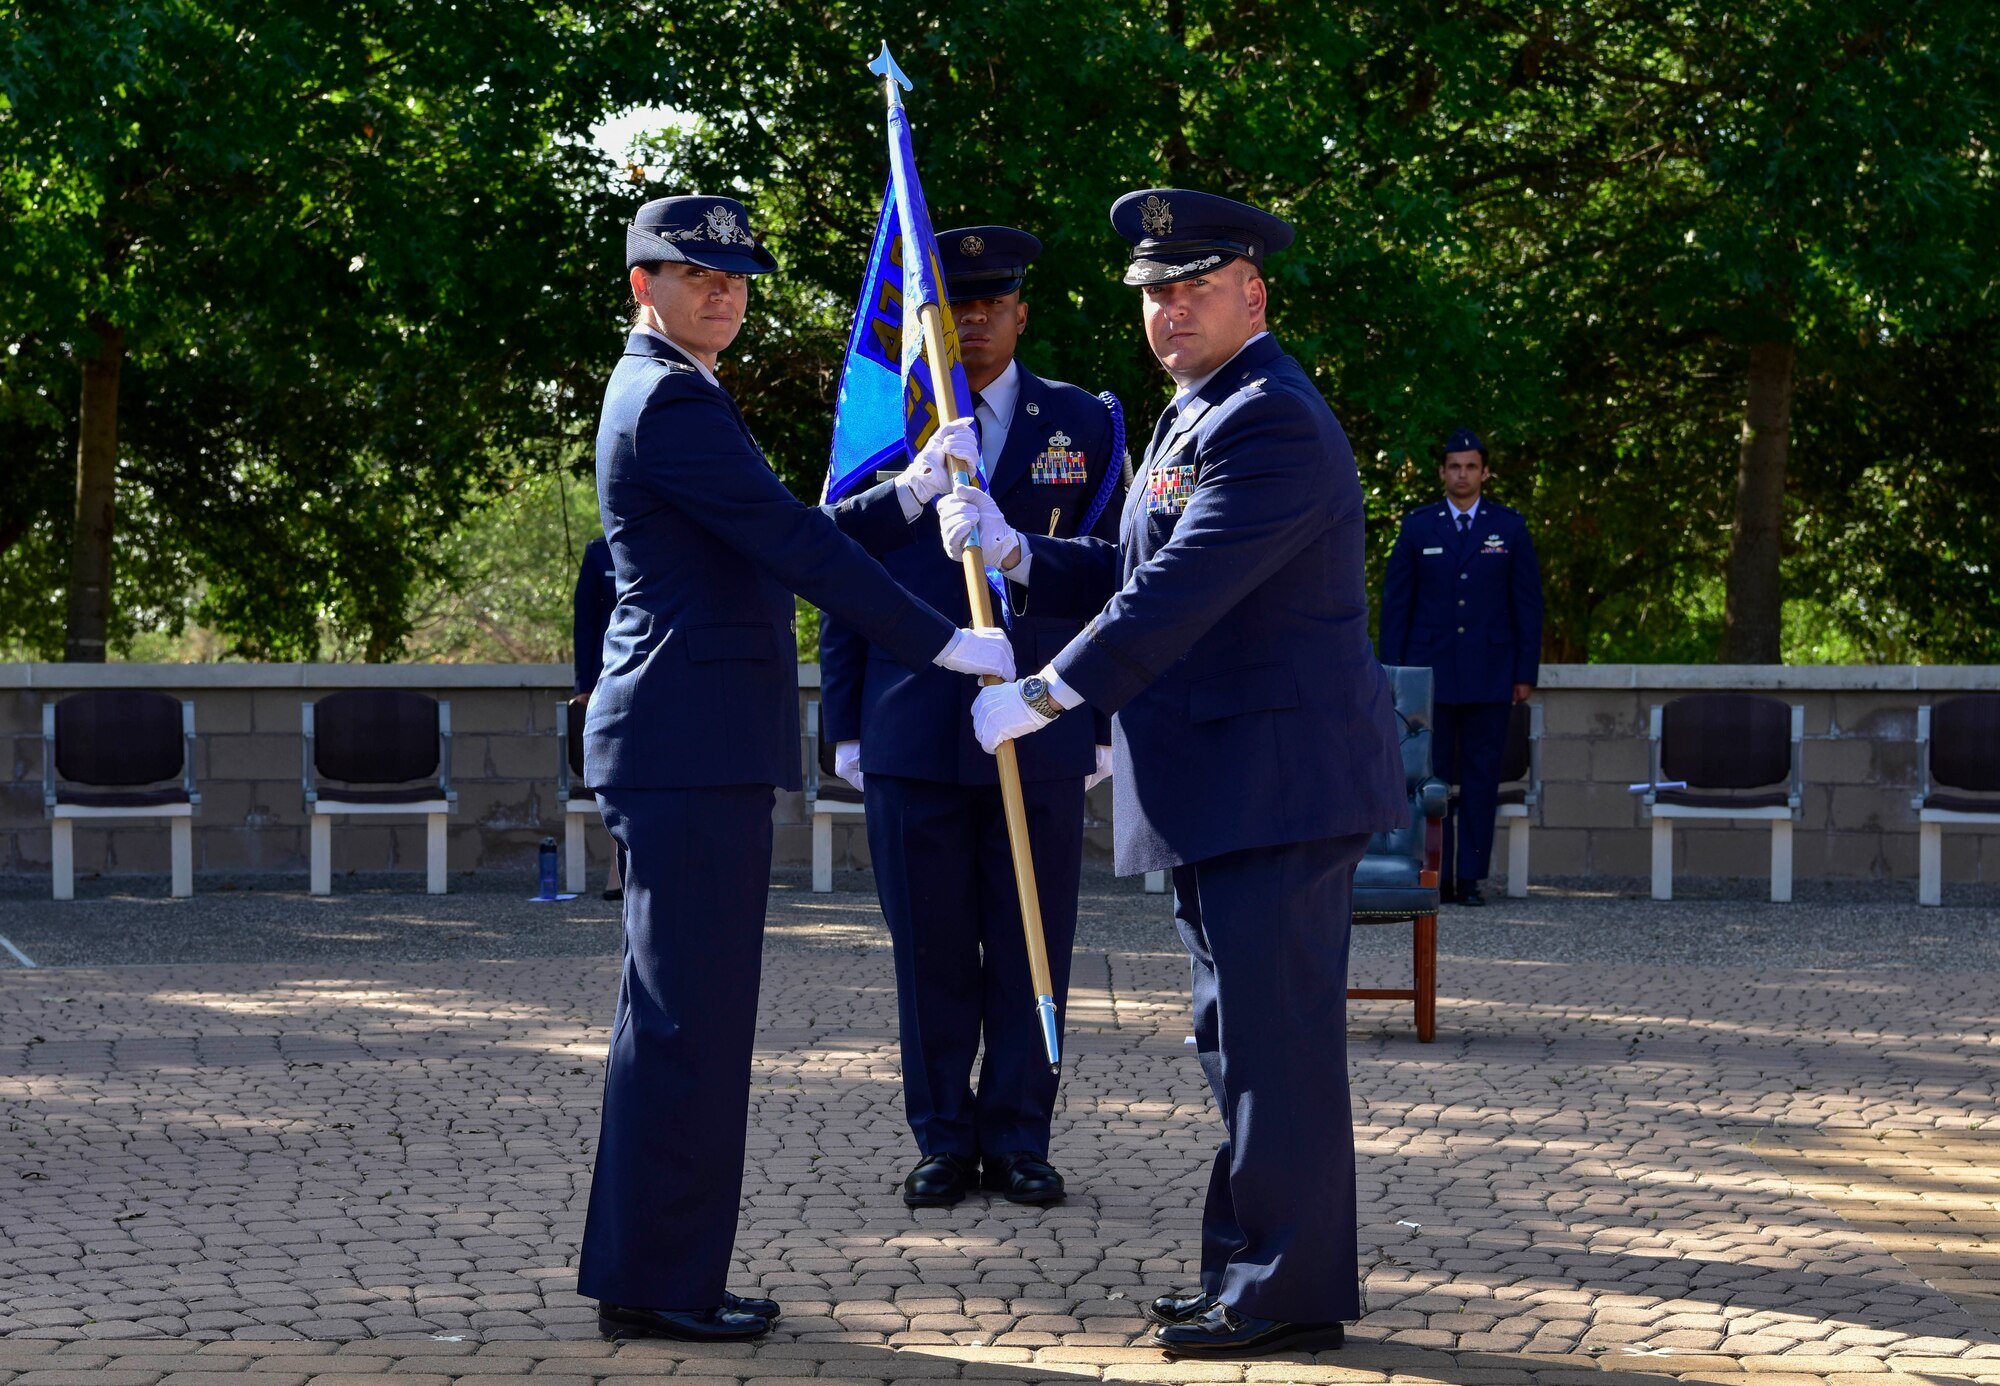 Col. Carey Jones, 47th Operations Group commander, passes a guidon to the new commander of the 47th Student Squadron, Lt. Col. Christopher Best, during a change of command ceremony at Laughlin Air Force Base, Texas, May 18, 2020. The passing of the guidon represents a formal transfer of authority and responsibility from one commander to the next. (U.S. Air Force photo by Senior Airman Marco A. Gomez)